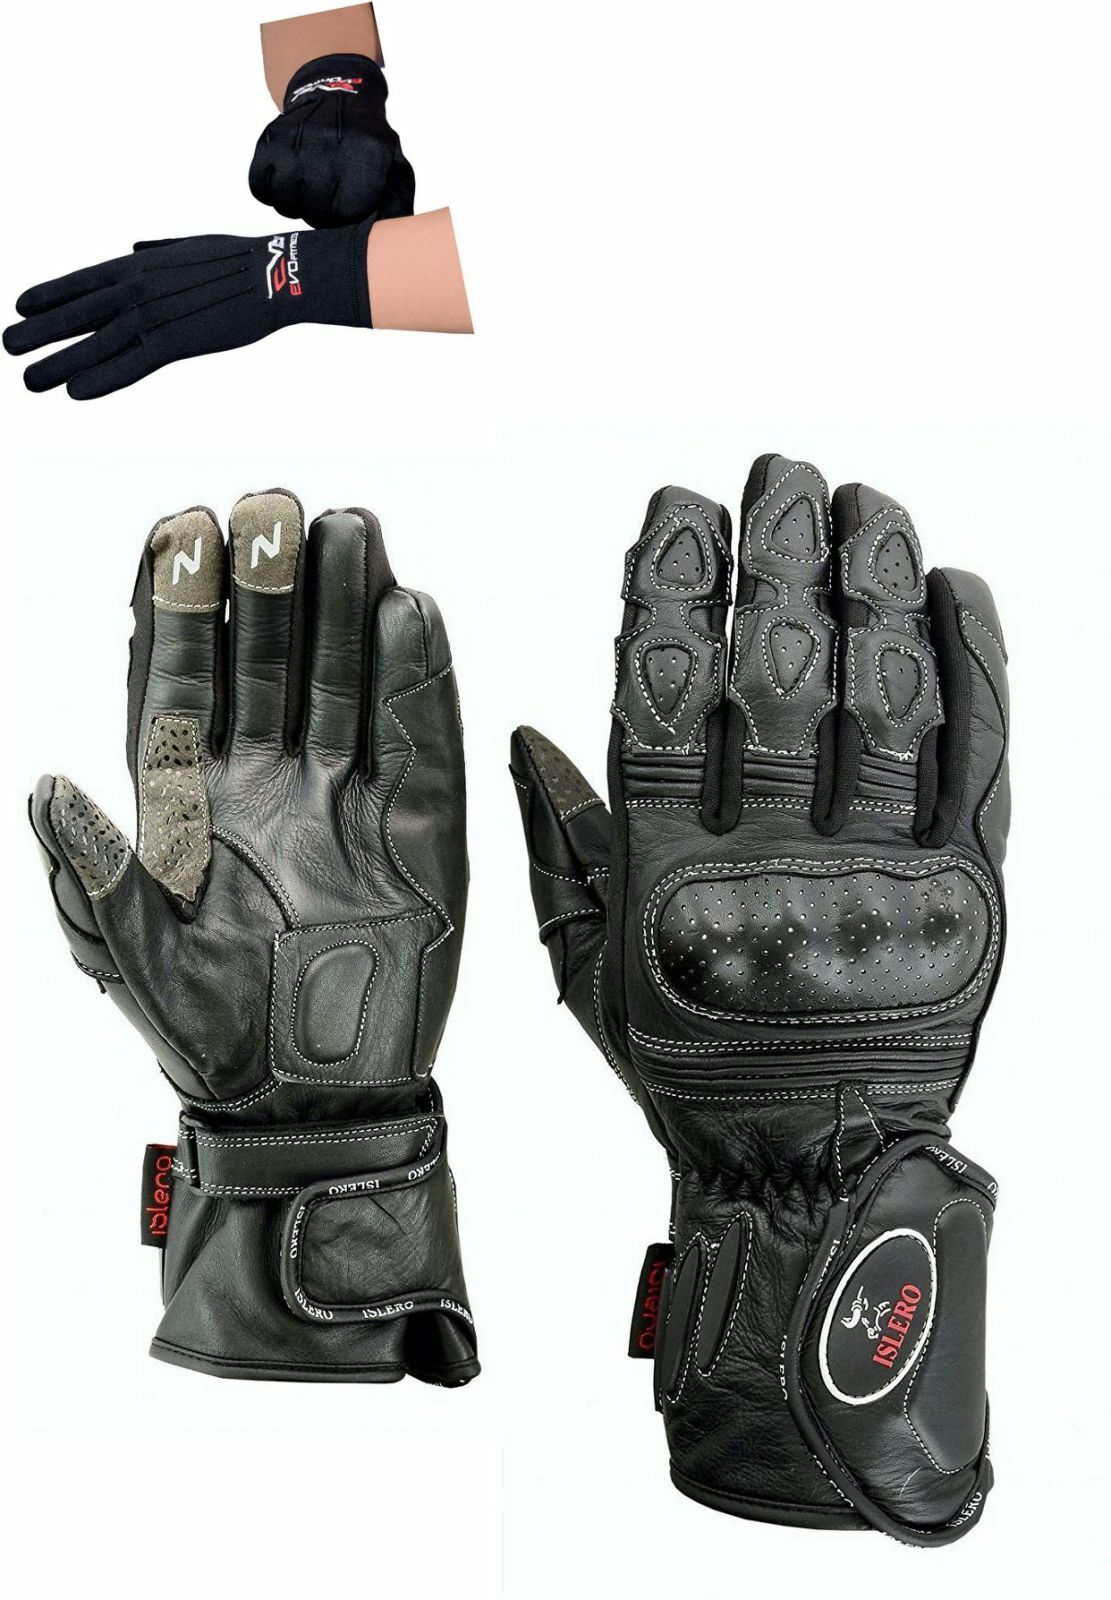 ISLERO Leather Thermal Winter Motorbike Motorcycle Gloves Carbon Fiber Knuckles 